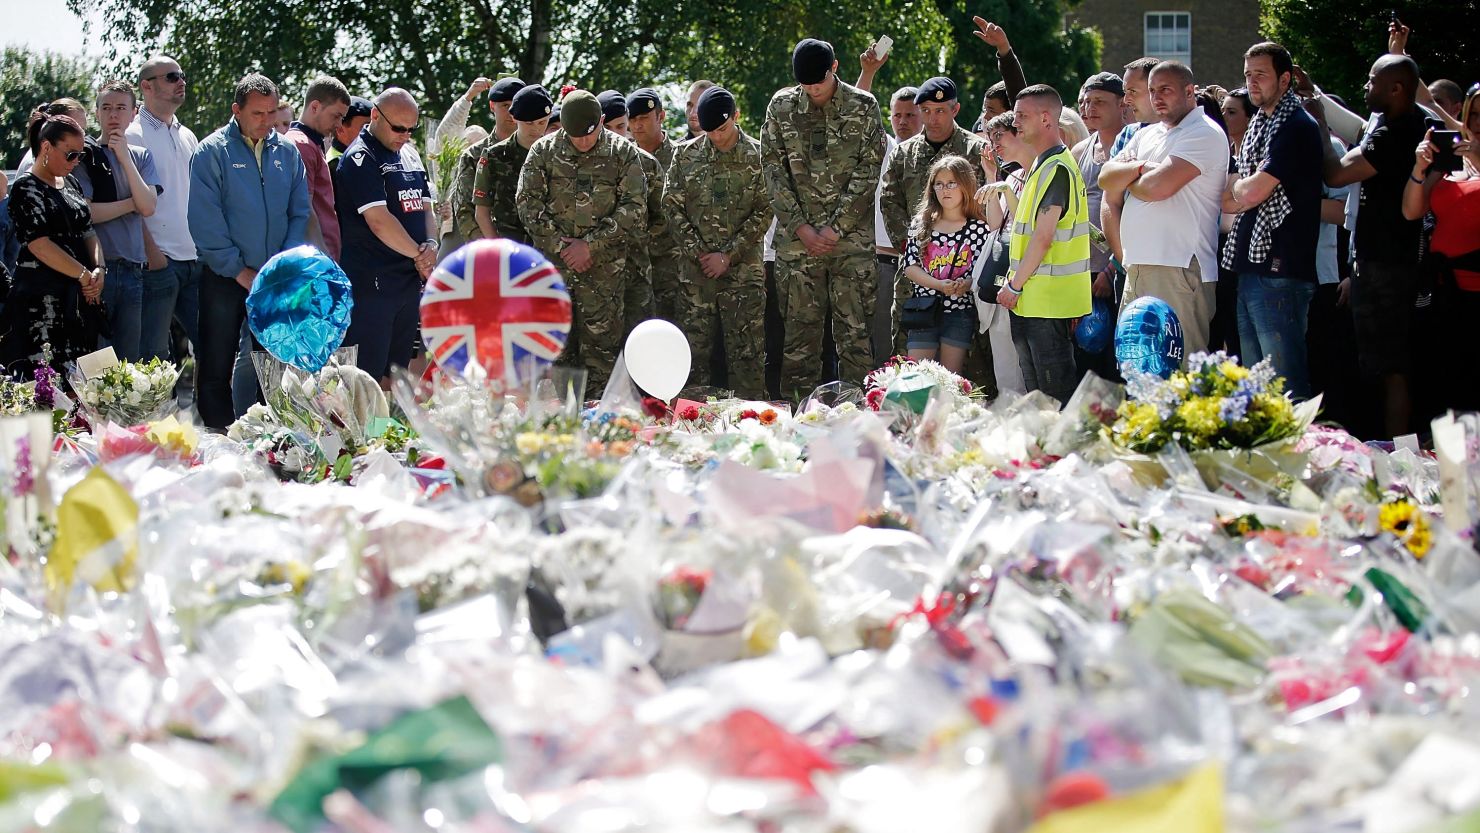 People and soldiers gather on May 26 outside the Royal Artillery Barracks, near where Drummer Lee Rigby was killed.